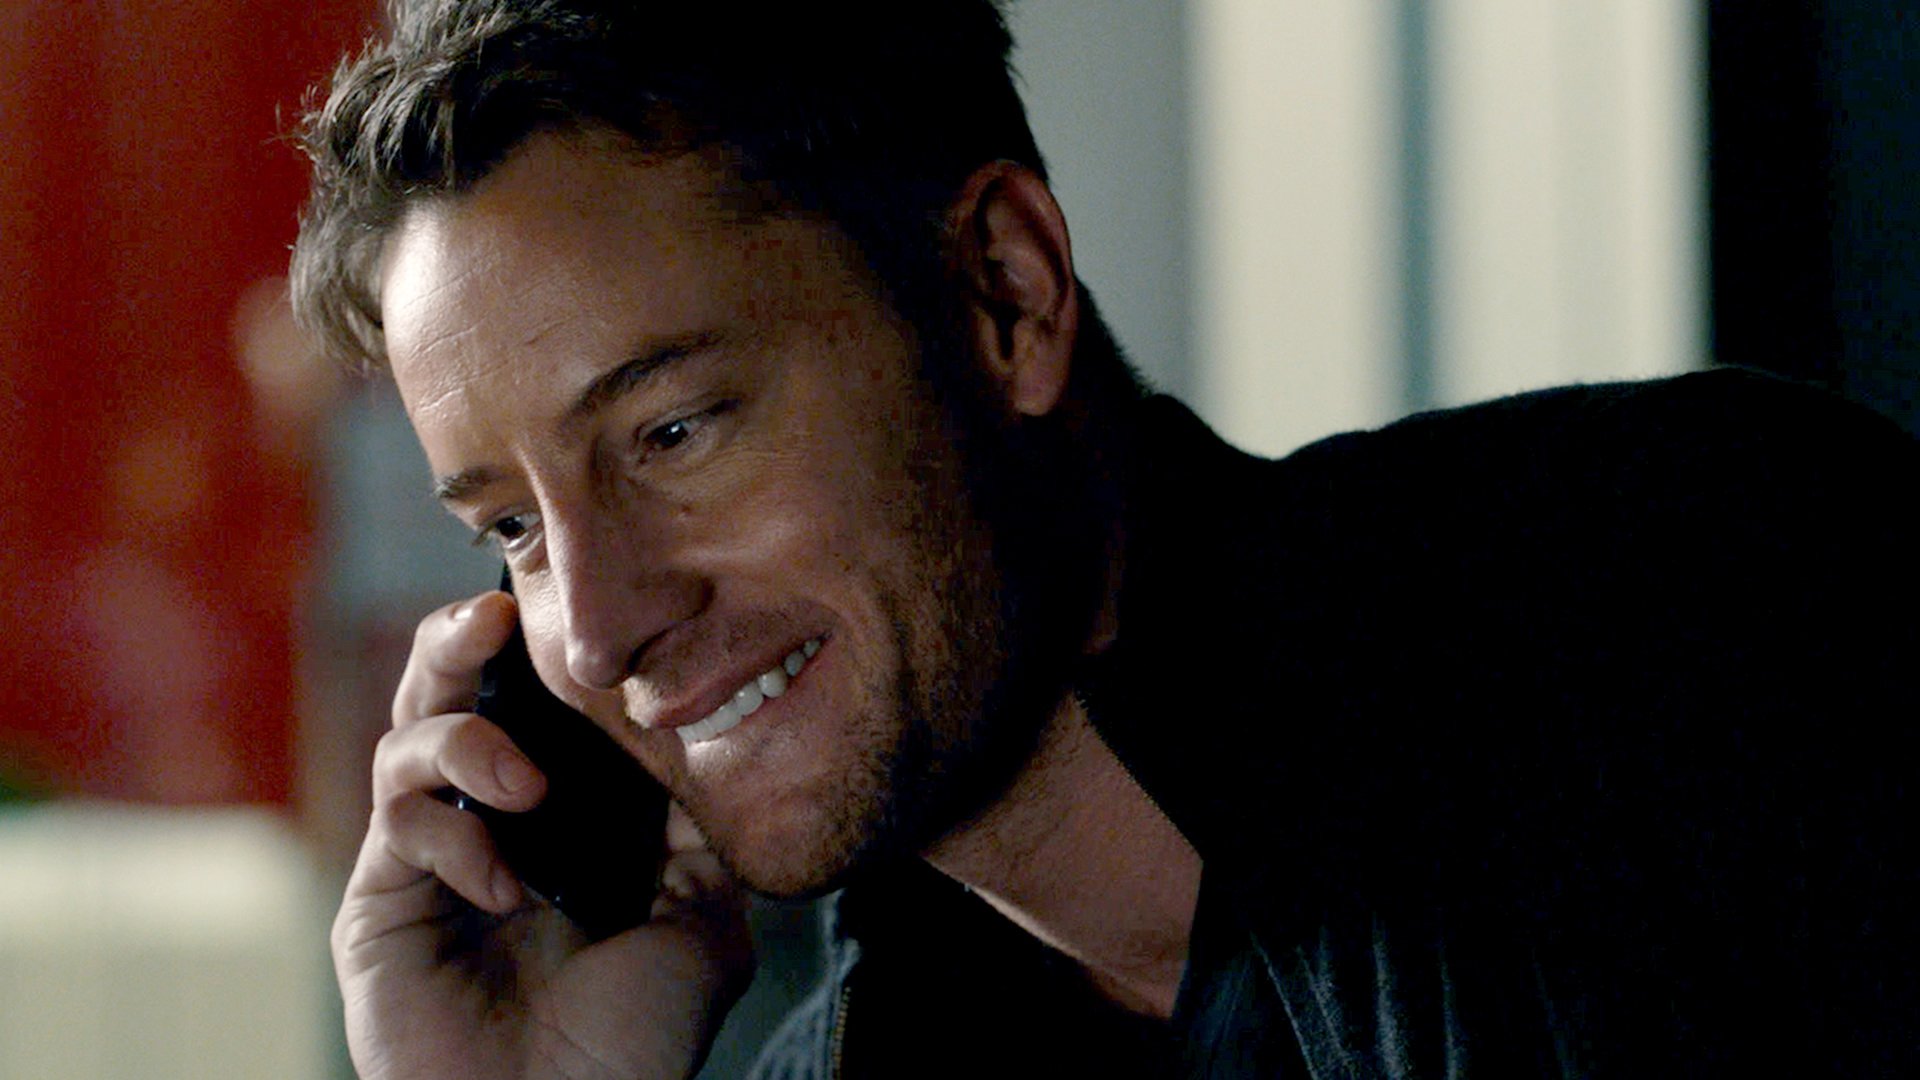 Justin Hartley as Kevin smiling on the phone on ‘This Is Us’ Season 5 Episode 8 